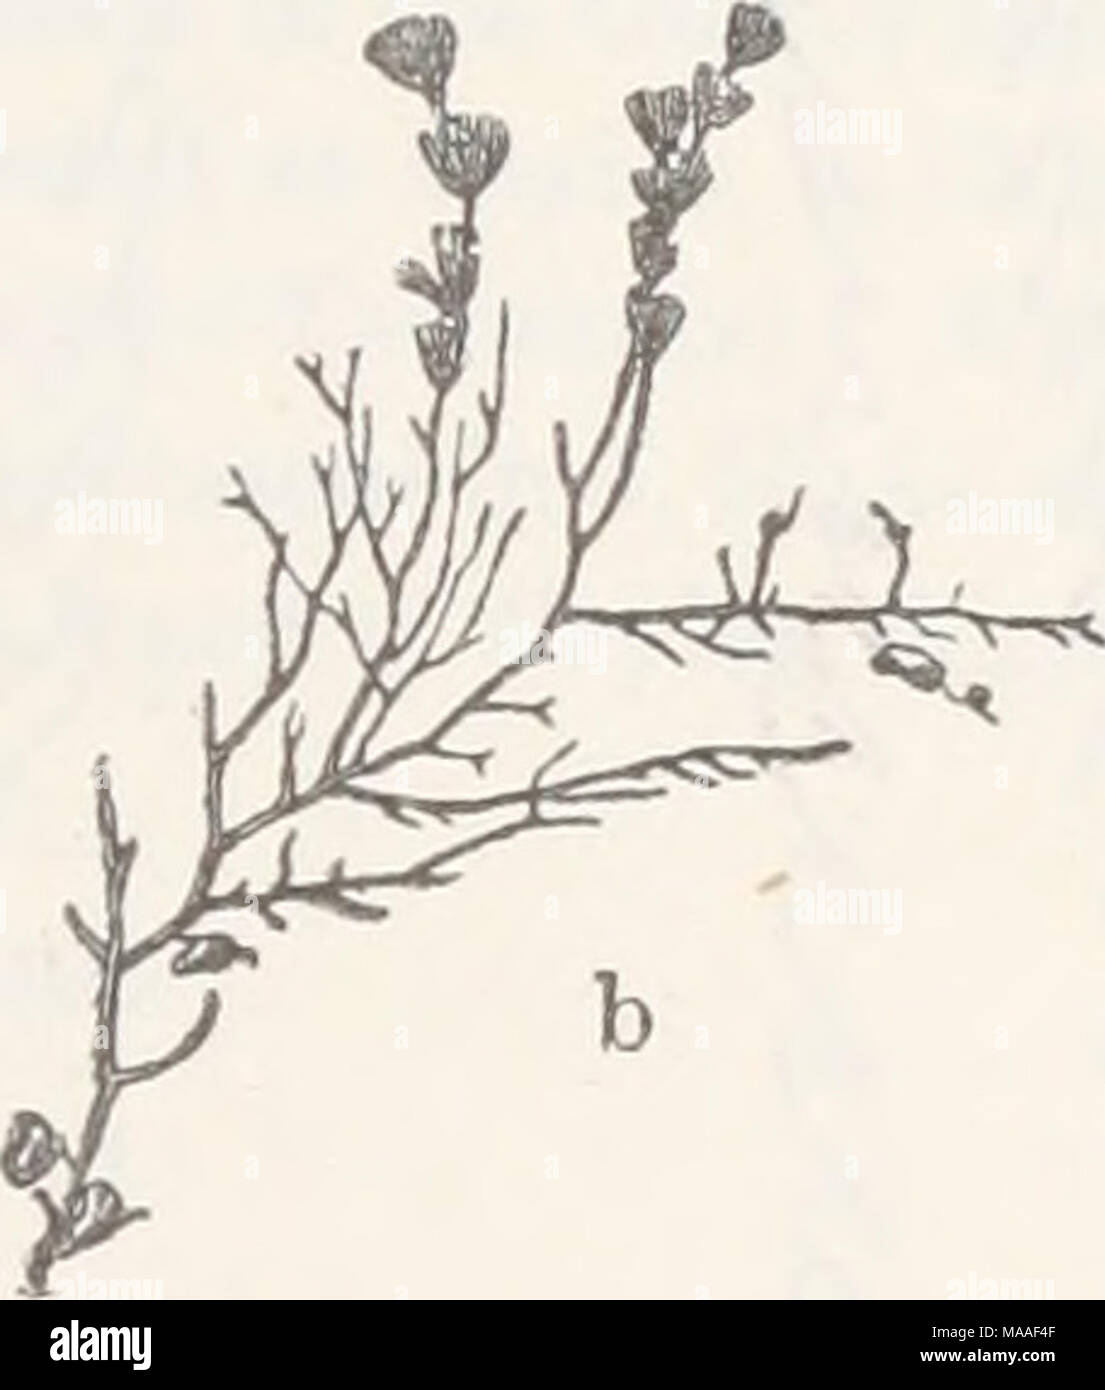 . Ecological and systematic studies of the Ceylon species of Caulerpa . Fig. 1.—C. verticillata, j. g. ag. (1 x 1). Periodicity.—^From notes taken by me it seems that C. verticillata at Galle reaches its highest development during the months from November to March, when it occurs in masses at the mouth of the river. On visiting the identical spot in August of the same year (1903) it was scantier, but Ceramia and other Florideae were more abundant. The specimens of this plant collected by Prof. Kjellman (WiTTROCK &amp; NoRDSTBDT, AlgsB exsicc. No. 347) at Galle during the expedition of the &quo Stock Photo